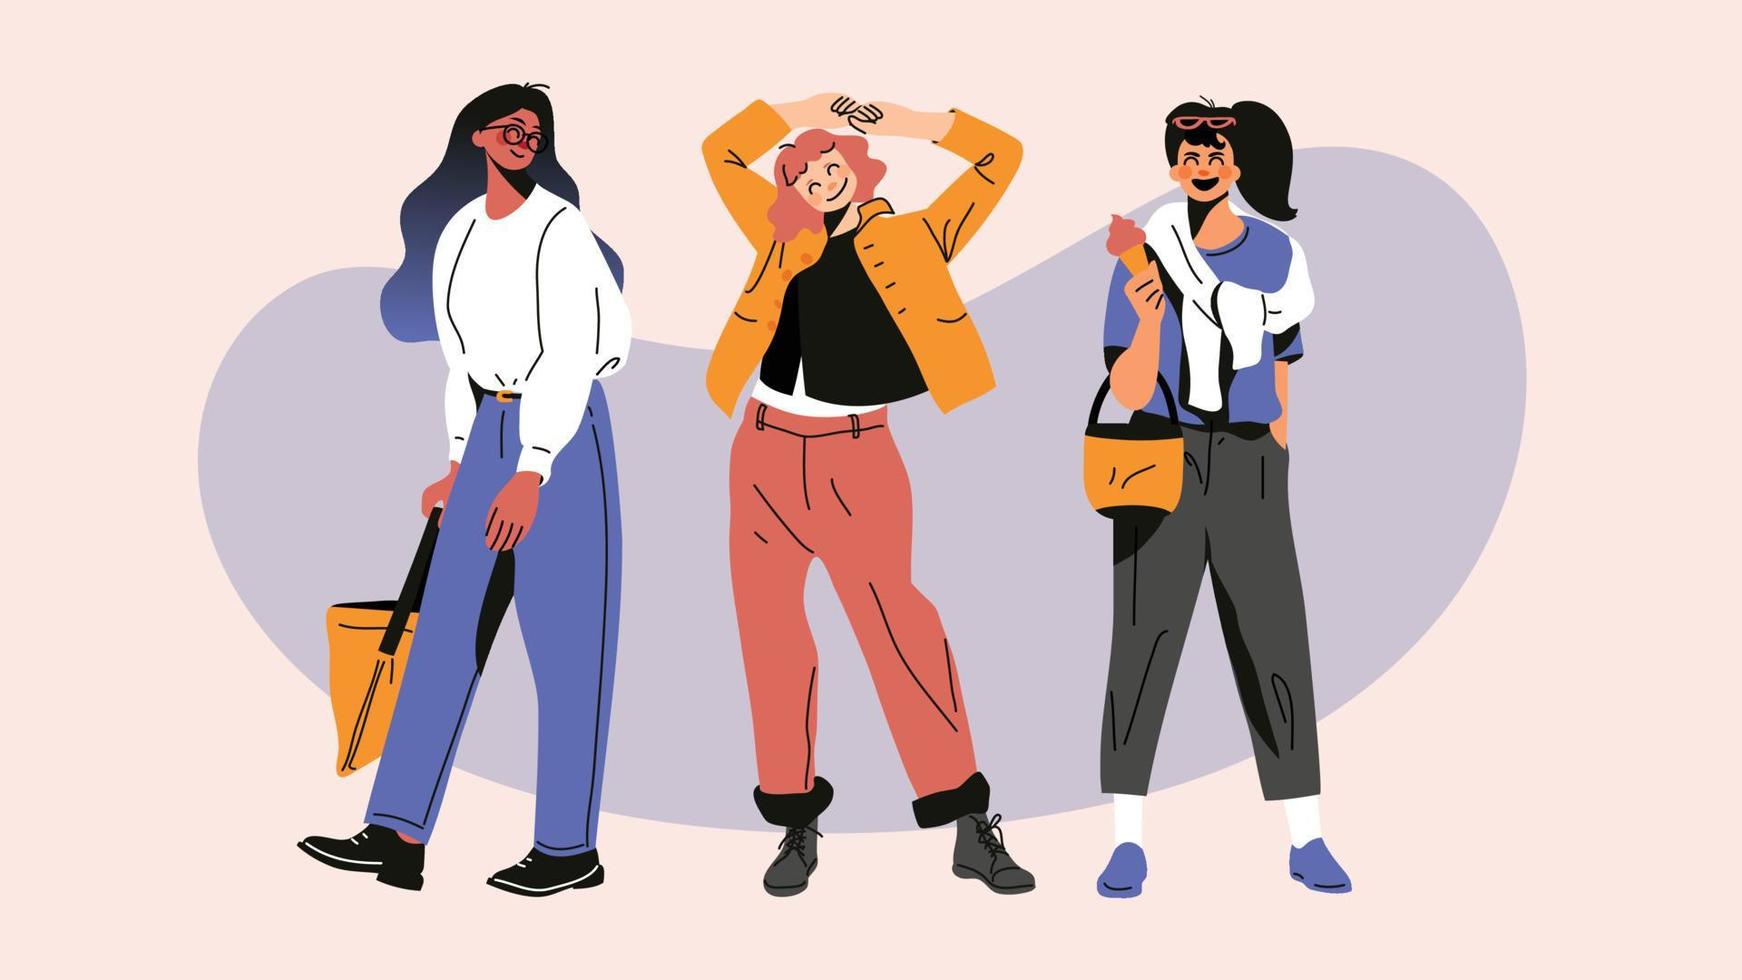 Women character design collection. Modern cartoon flat style design with teenage girls in different clothes, poses. Characters illustration for social media, background, poster, cover. vector